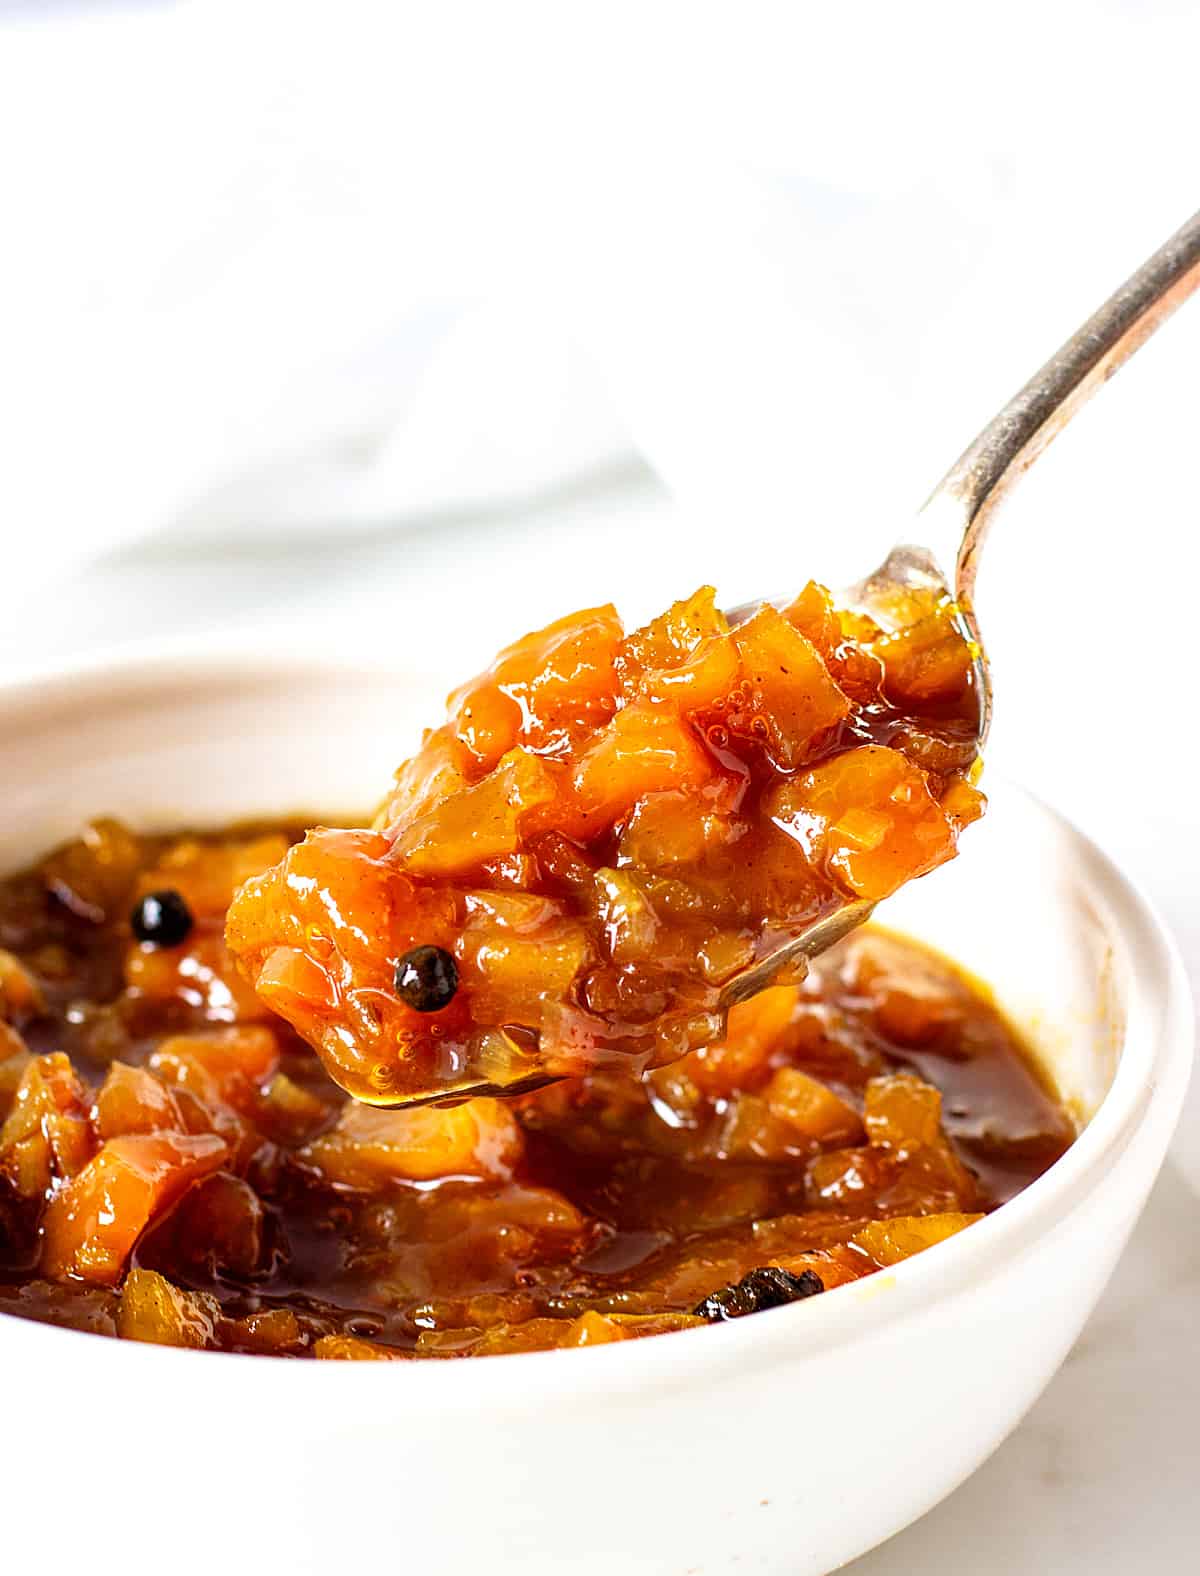 Lifting a spoon of peach chutney from white bowl